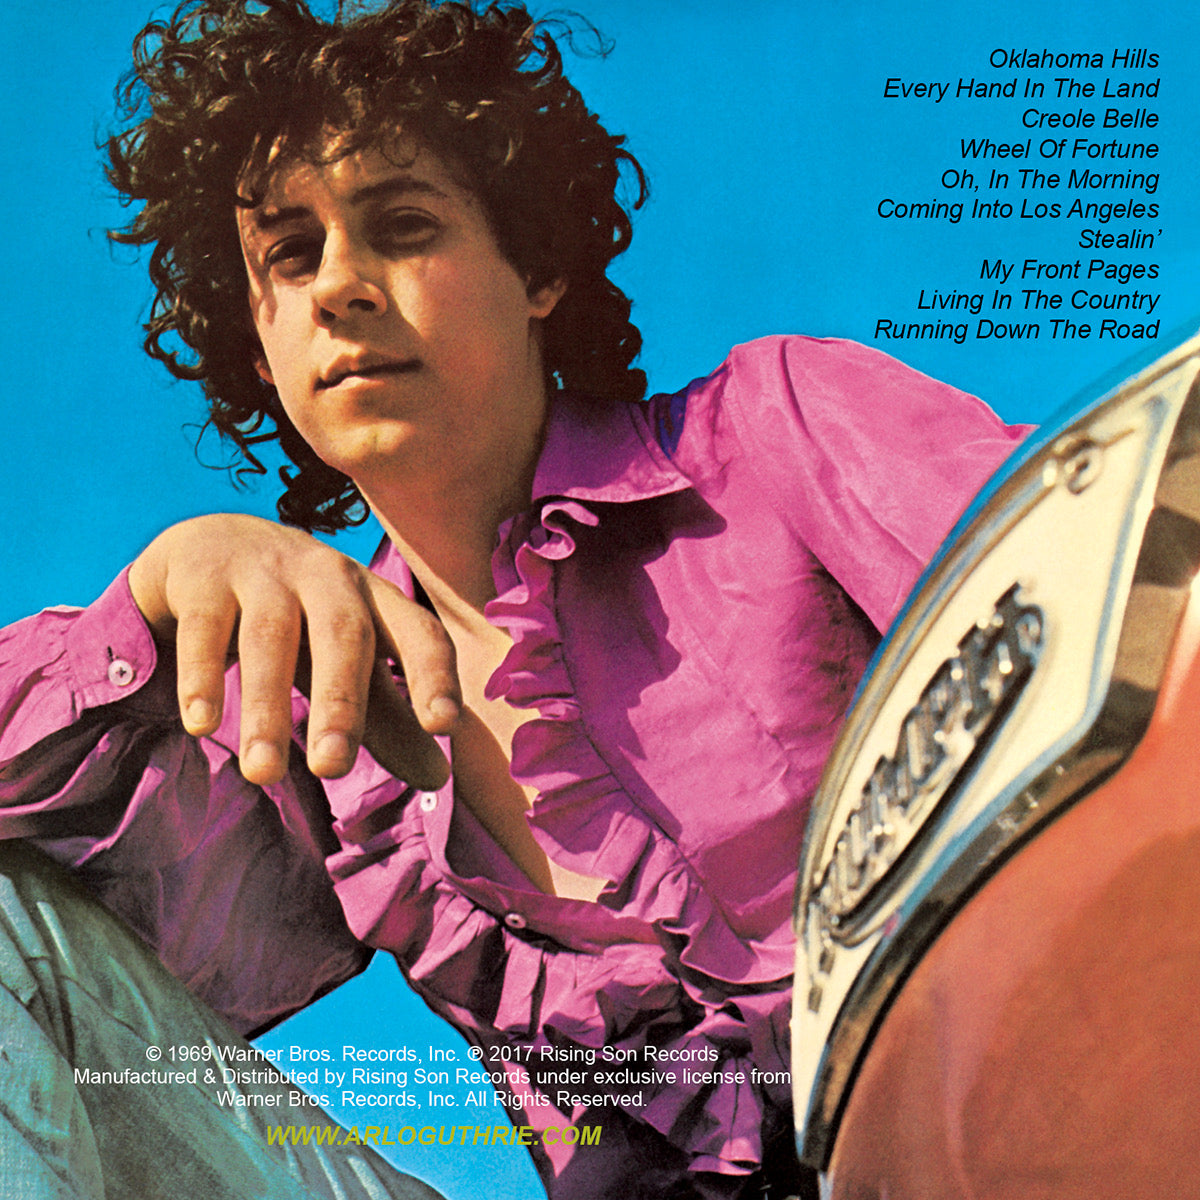 Running Down the Road (1969) CD – Arlo Guthrie